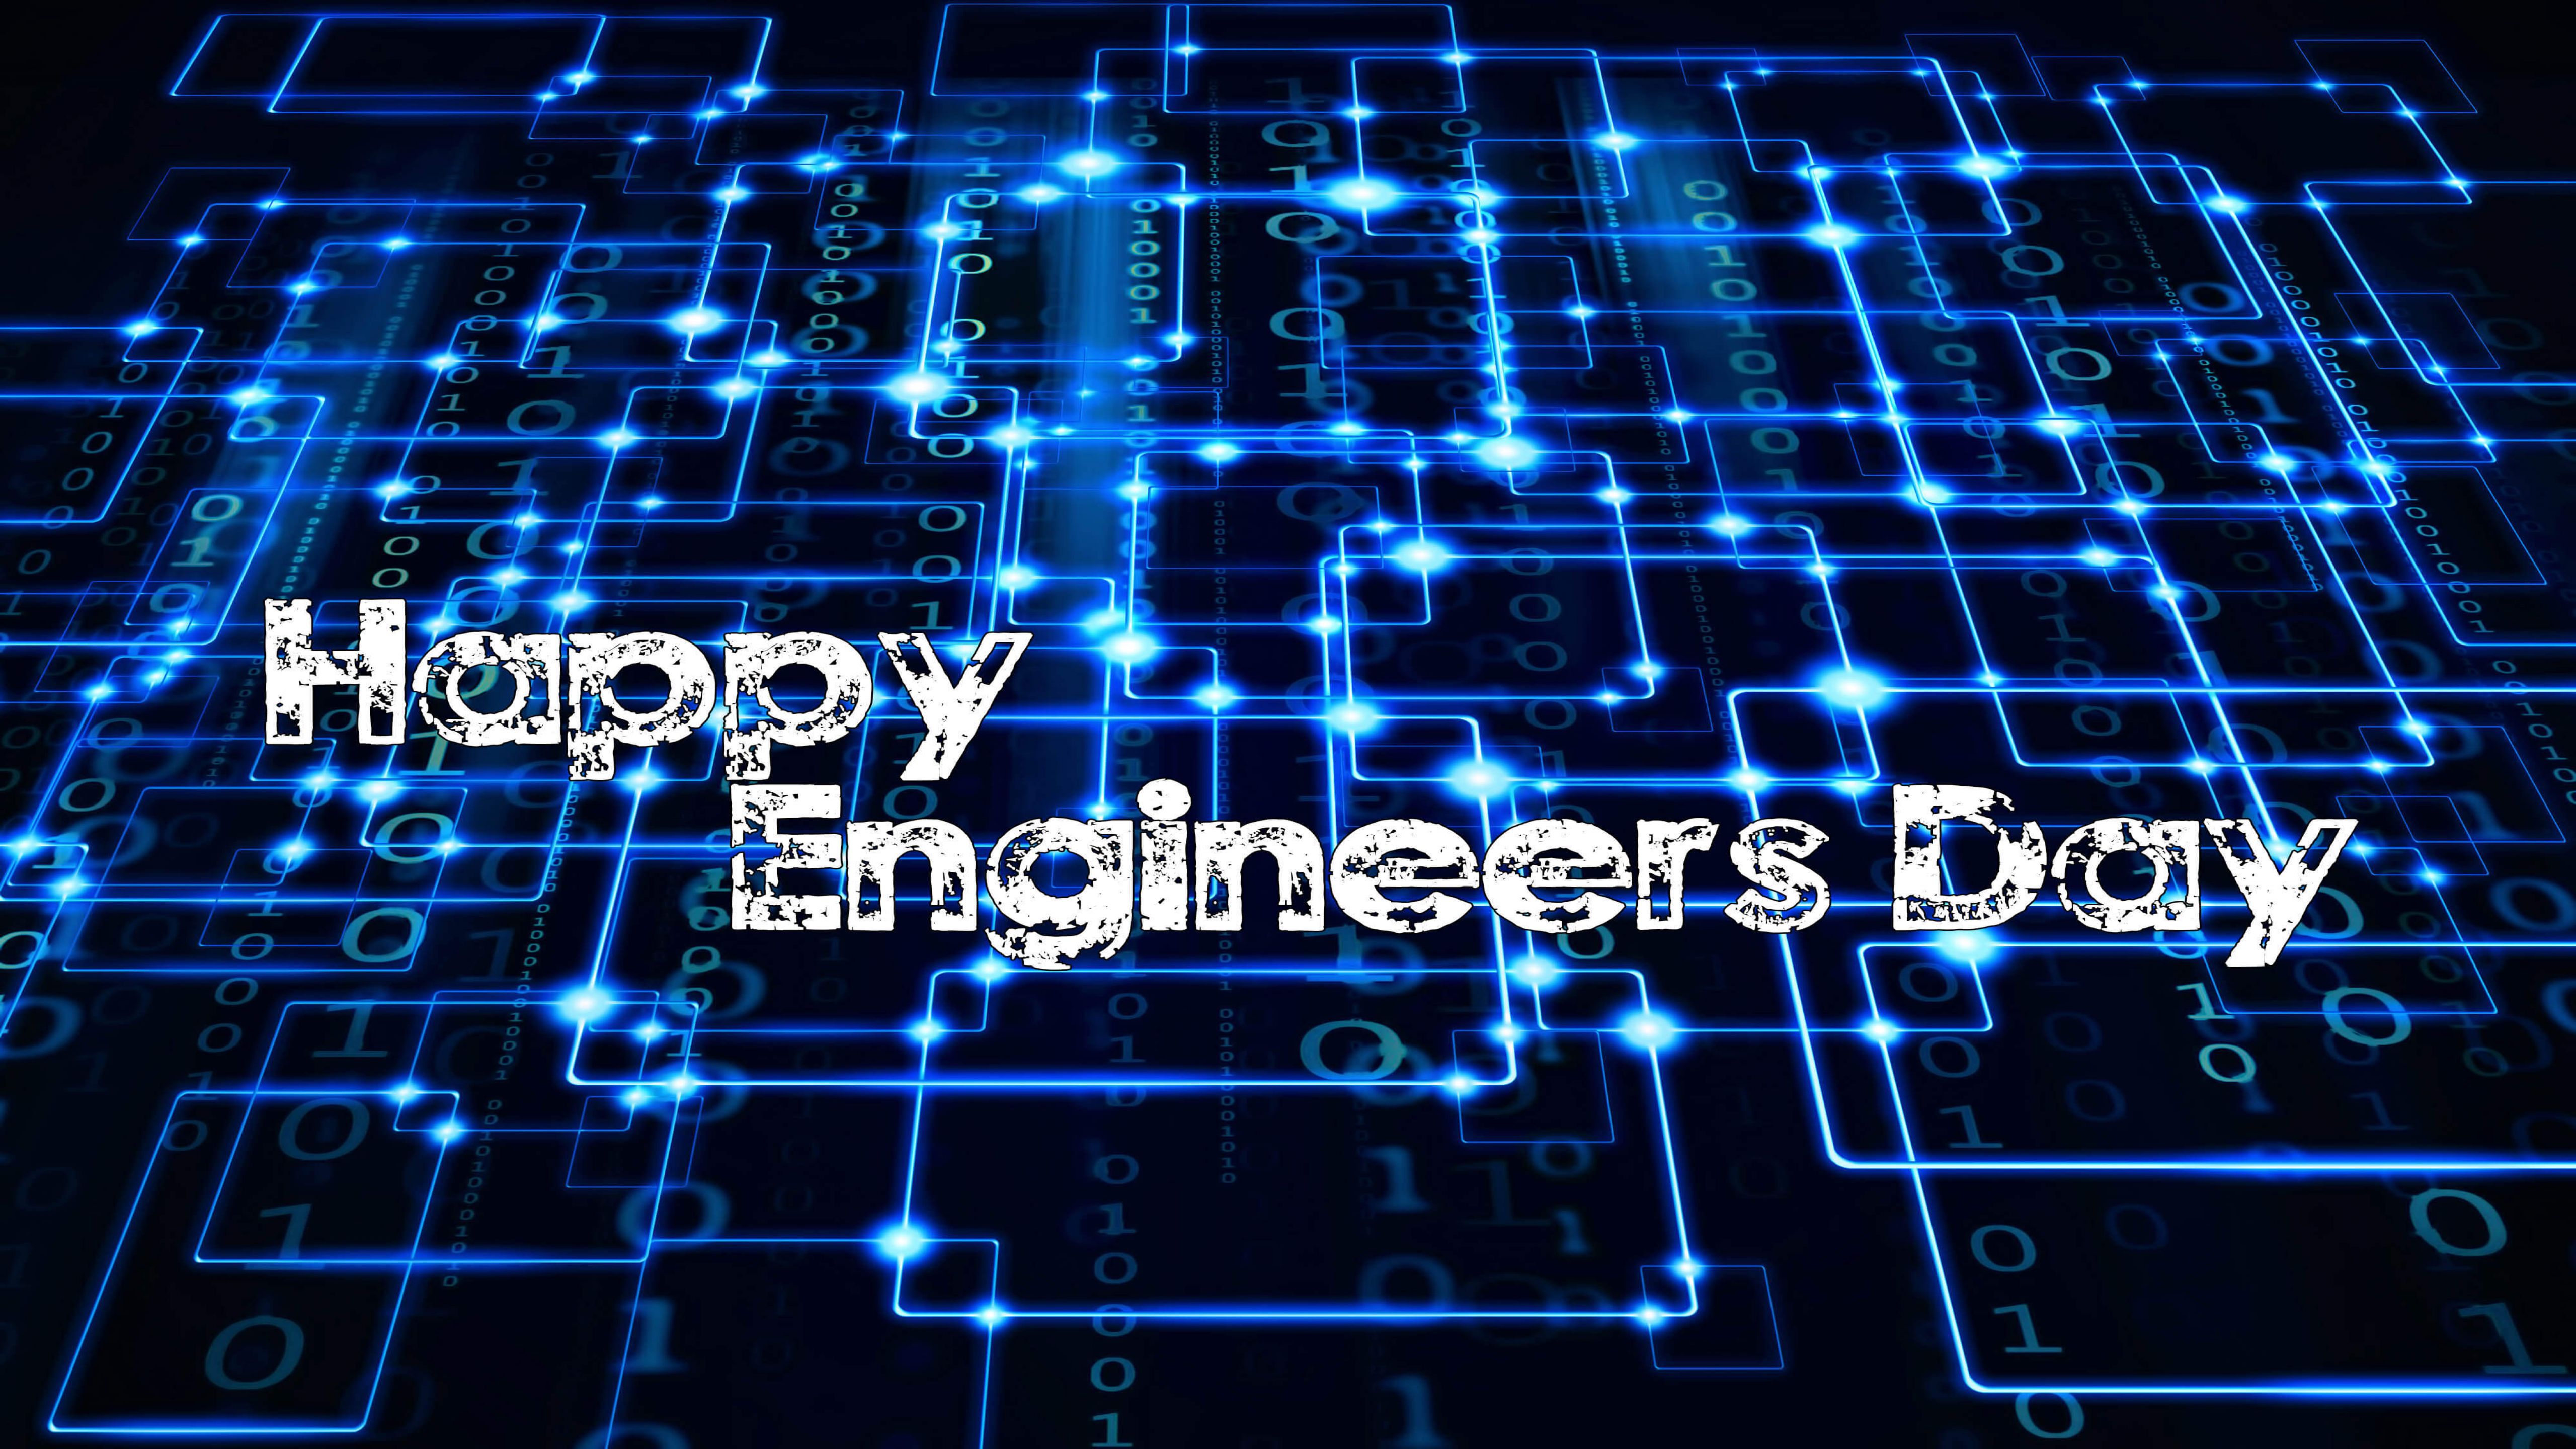 20 Engineers Day Images Pictures Photos